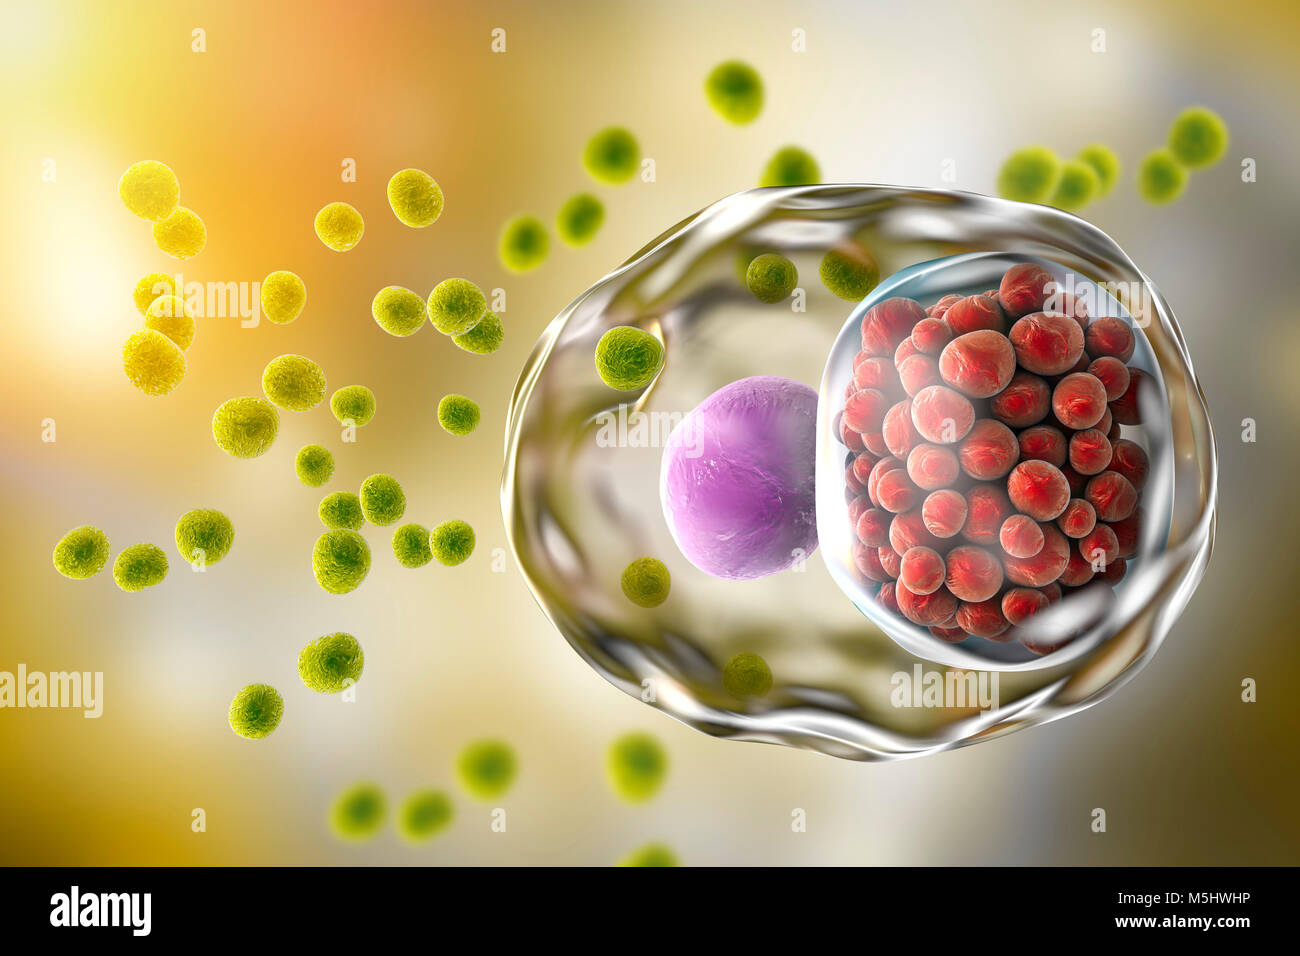 Chlamydia trachomatis bacteria. Computer illustration showing two life stages of Chlamydia: elementary bodies (extracellular non-multiplying infectious stage, small green spheres) and an inclusion composed of a group of chlamydia reticulate bodies (intracellular multiplying stage, small red spheres) near the nucleus (violet) of a cell. Stock Photo